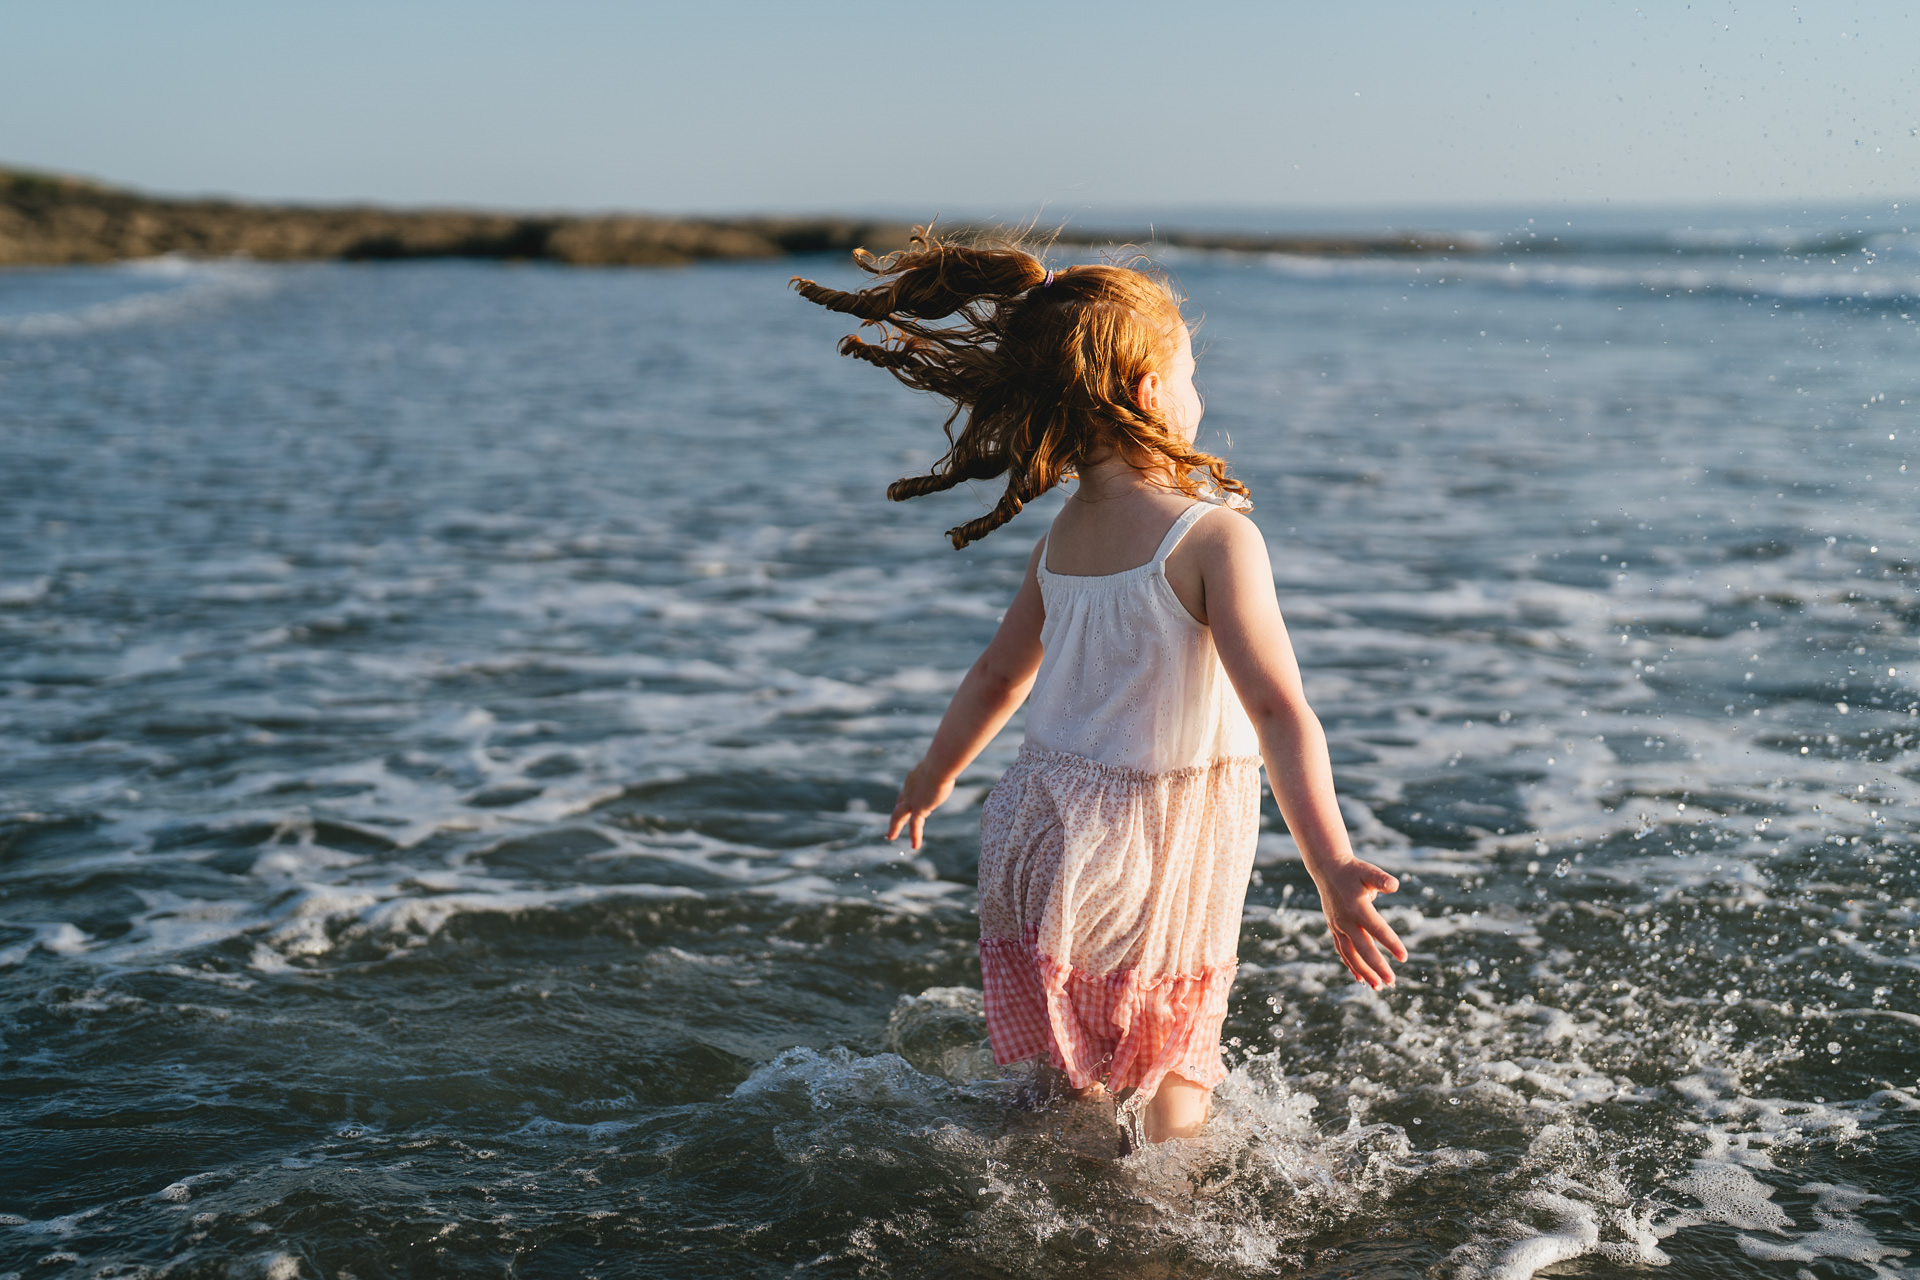 A young girl with ginger curls and a pink dress, jumping through waves in the sea